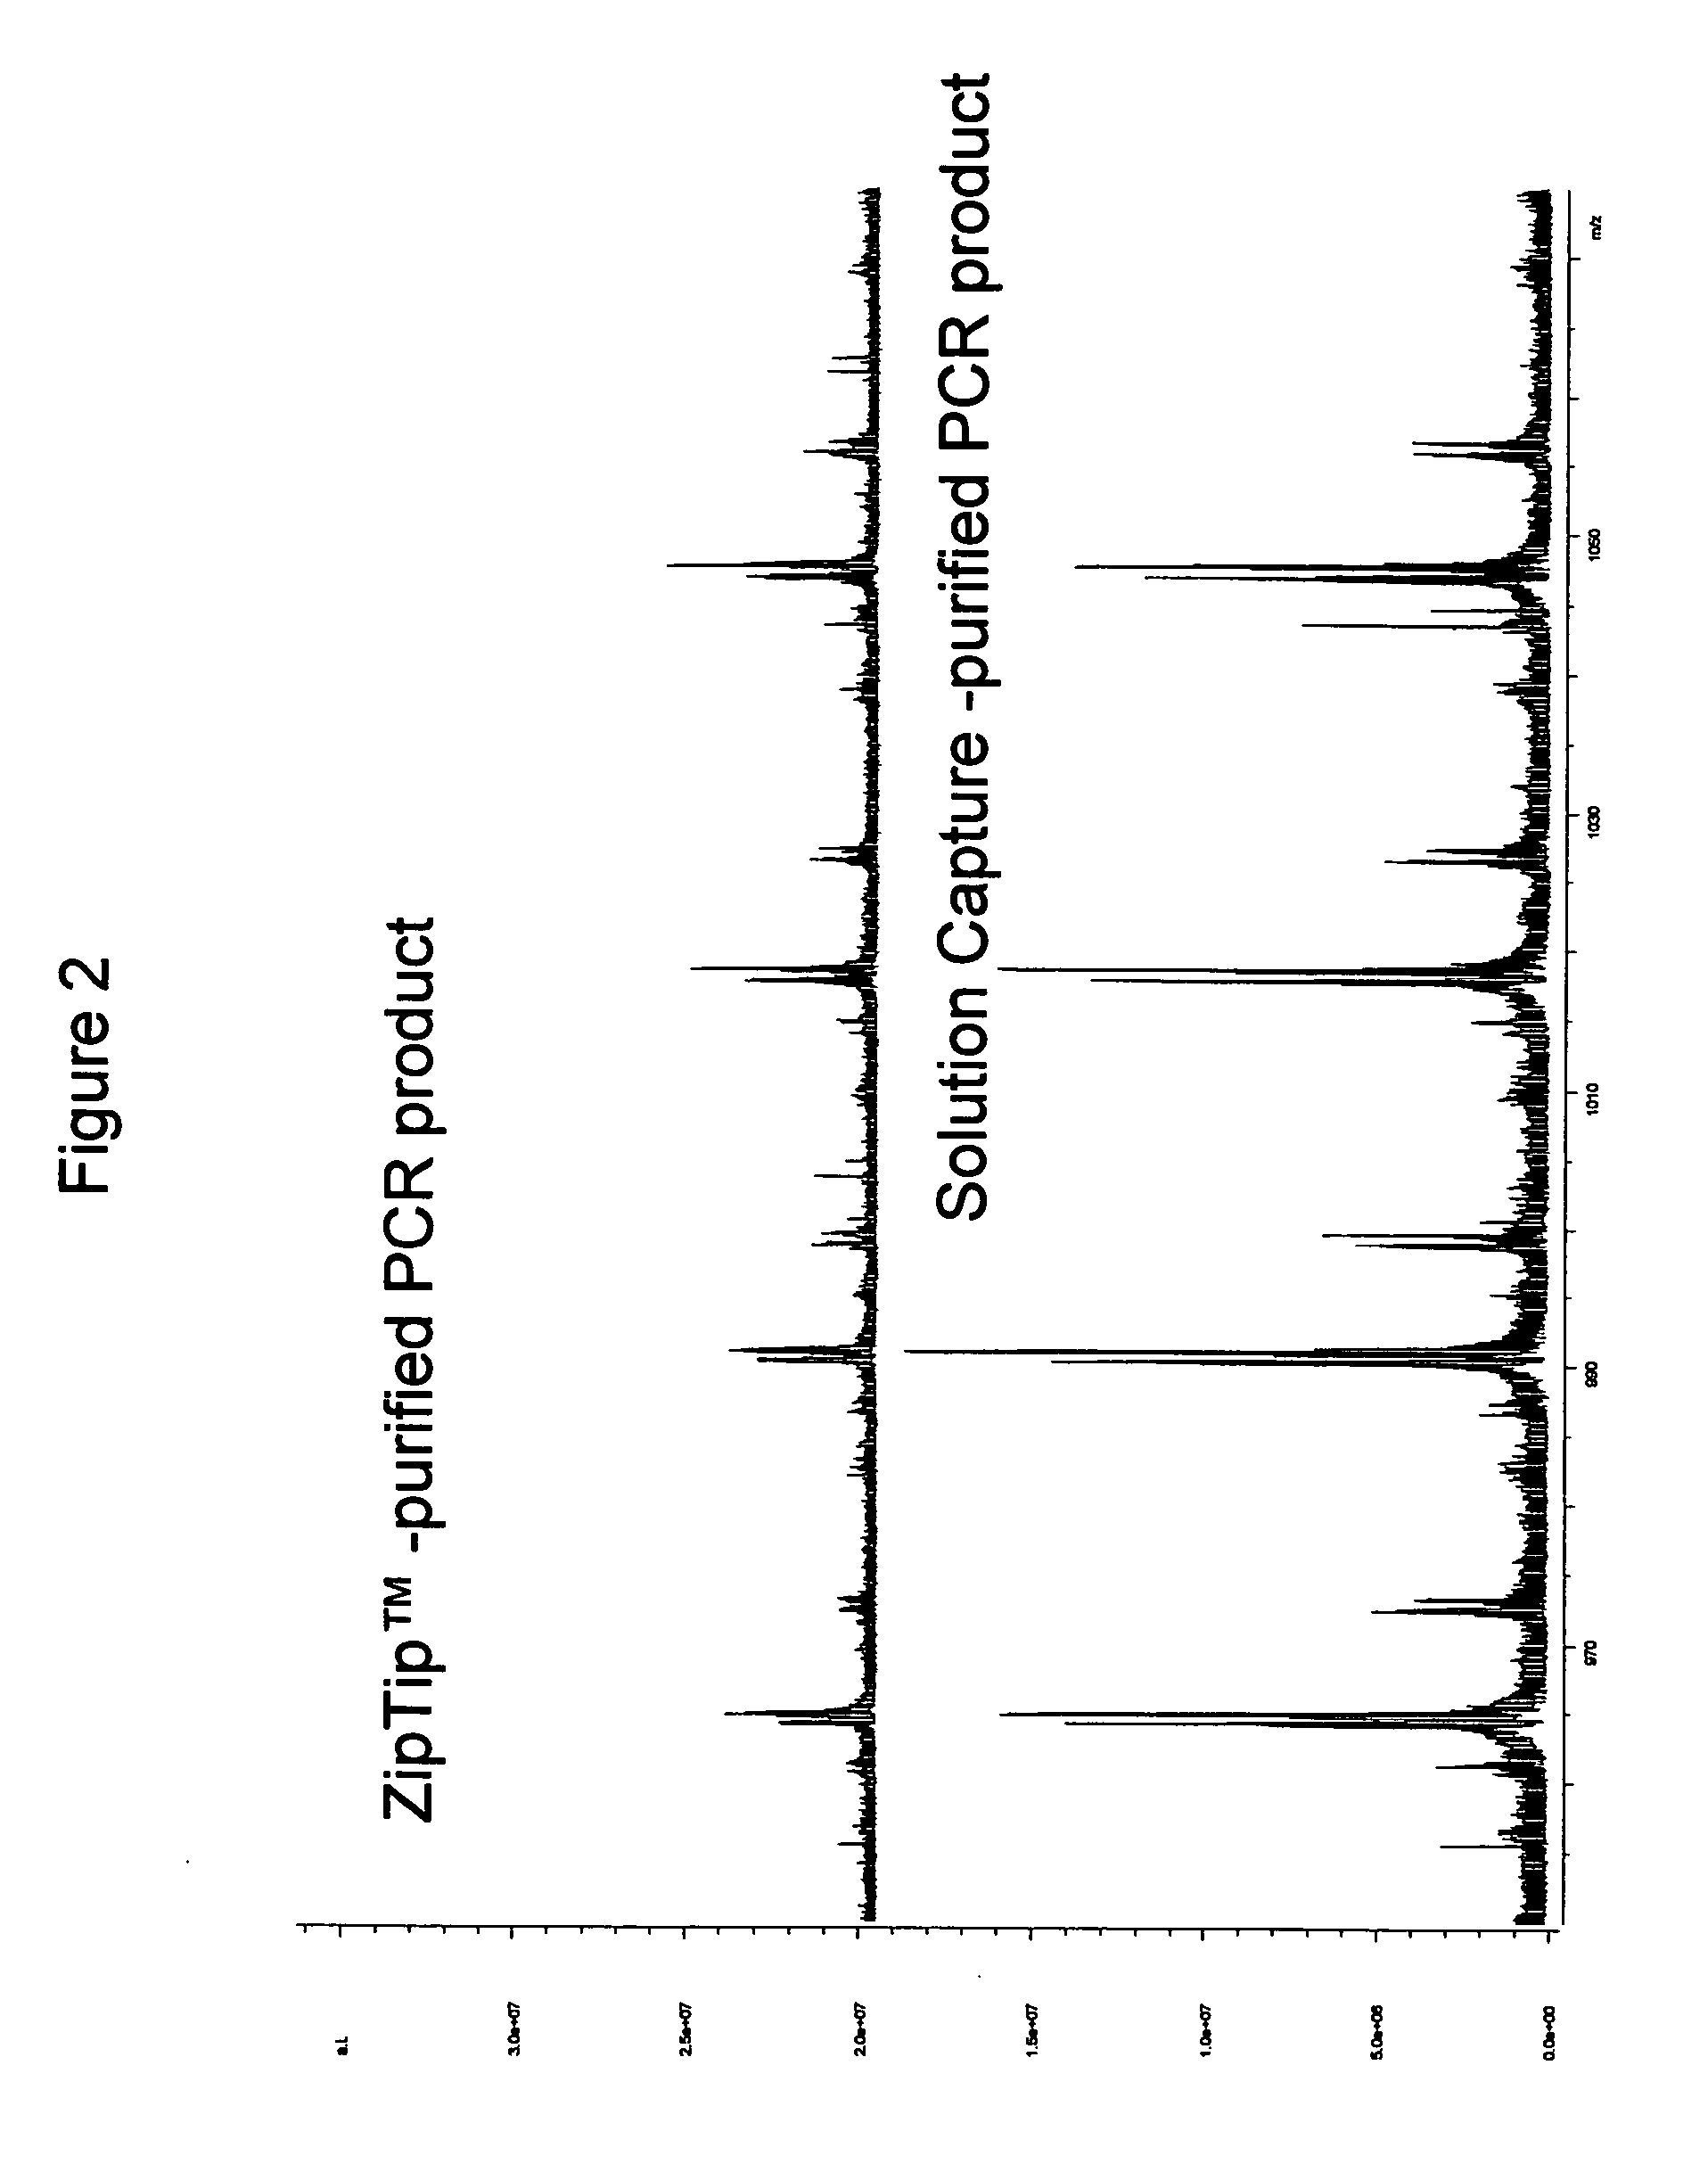 Methods for rapid purification of nucleic acids for subsequent analysis by mass spectrometry by solution capture